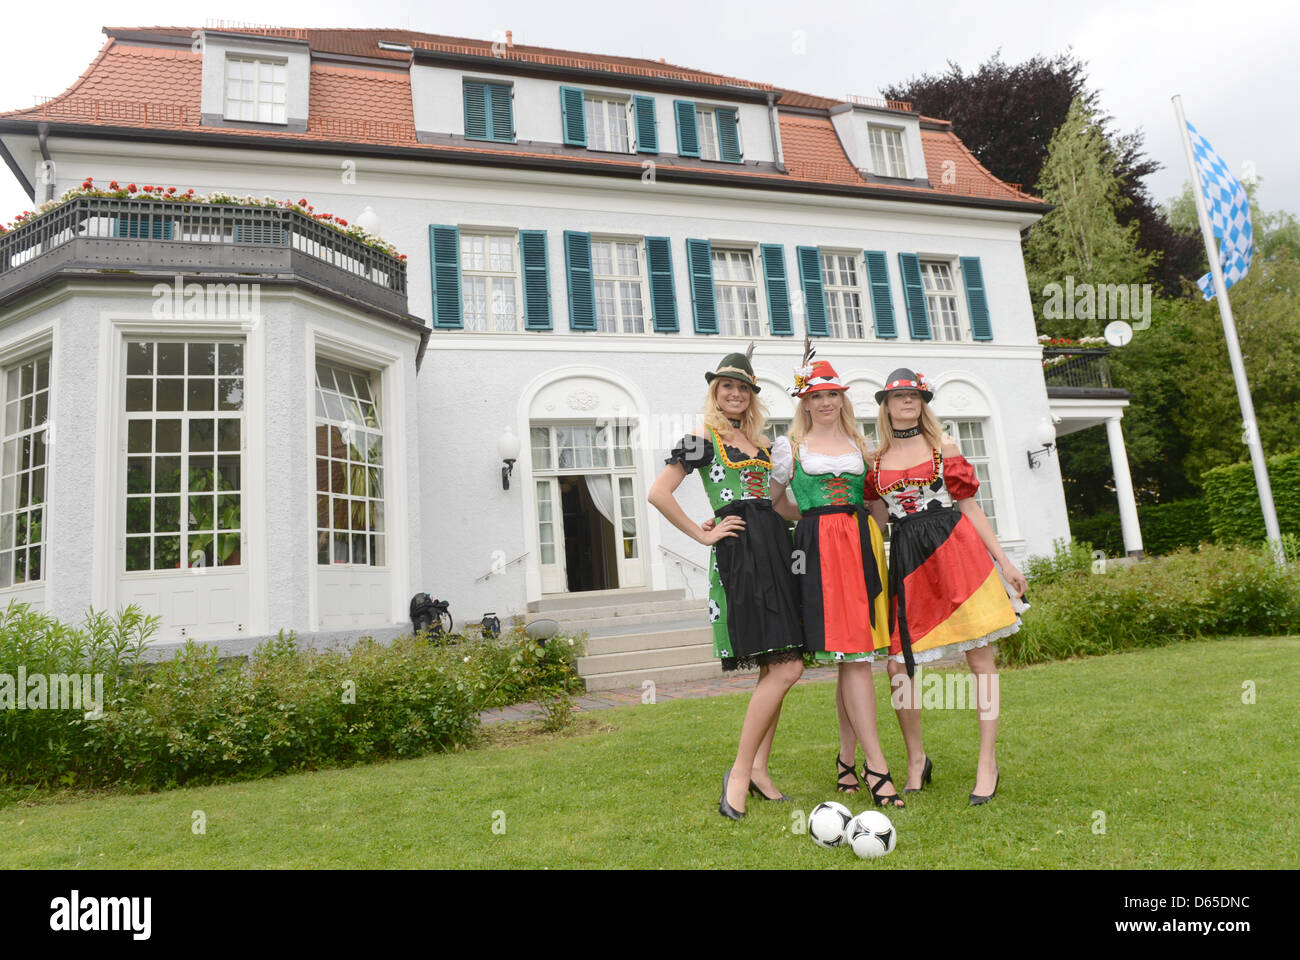 Television host Jessica Kastrop presents a dirndl (traditional Alpine peasant garb) in the German national colors on the occasion of the Euro 2012 at the garden of the Consulate General of the Republic of Poland in Munich, Germany, 01 June 2012. Photo: Felix Hoerhager Stock Photo